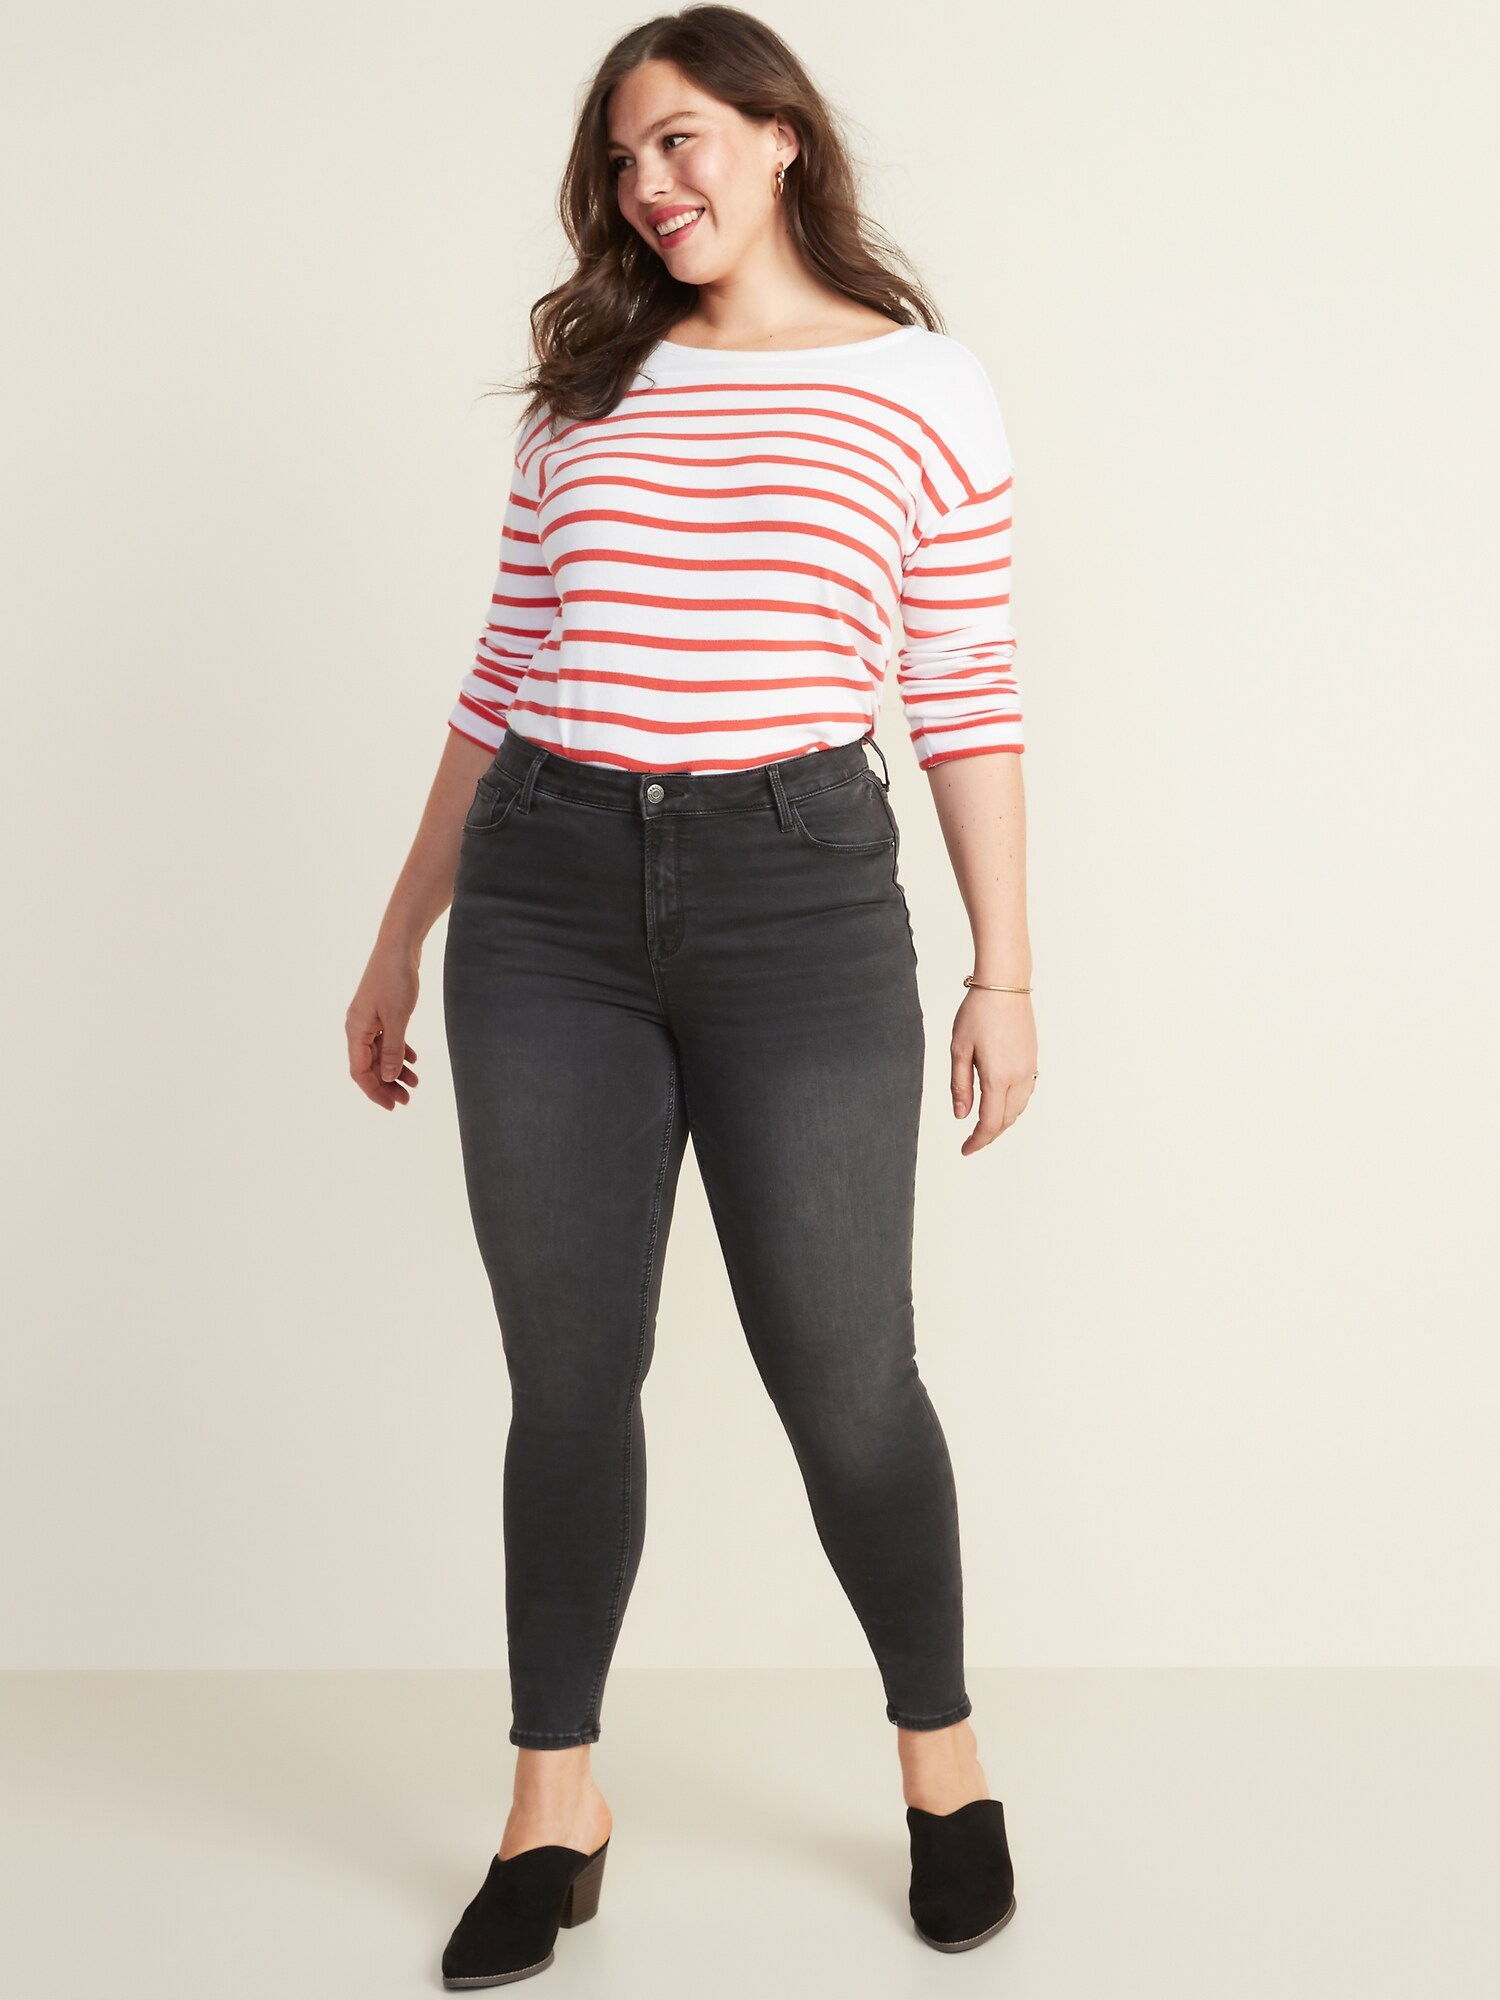 Mid-Rise Built-In Sculpt Rockstar Jeans for Women | Old Navy